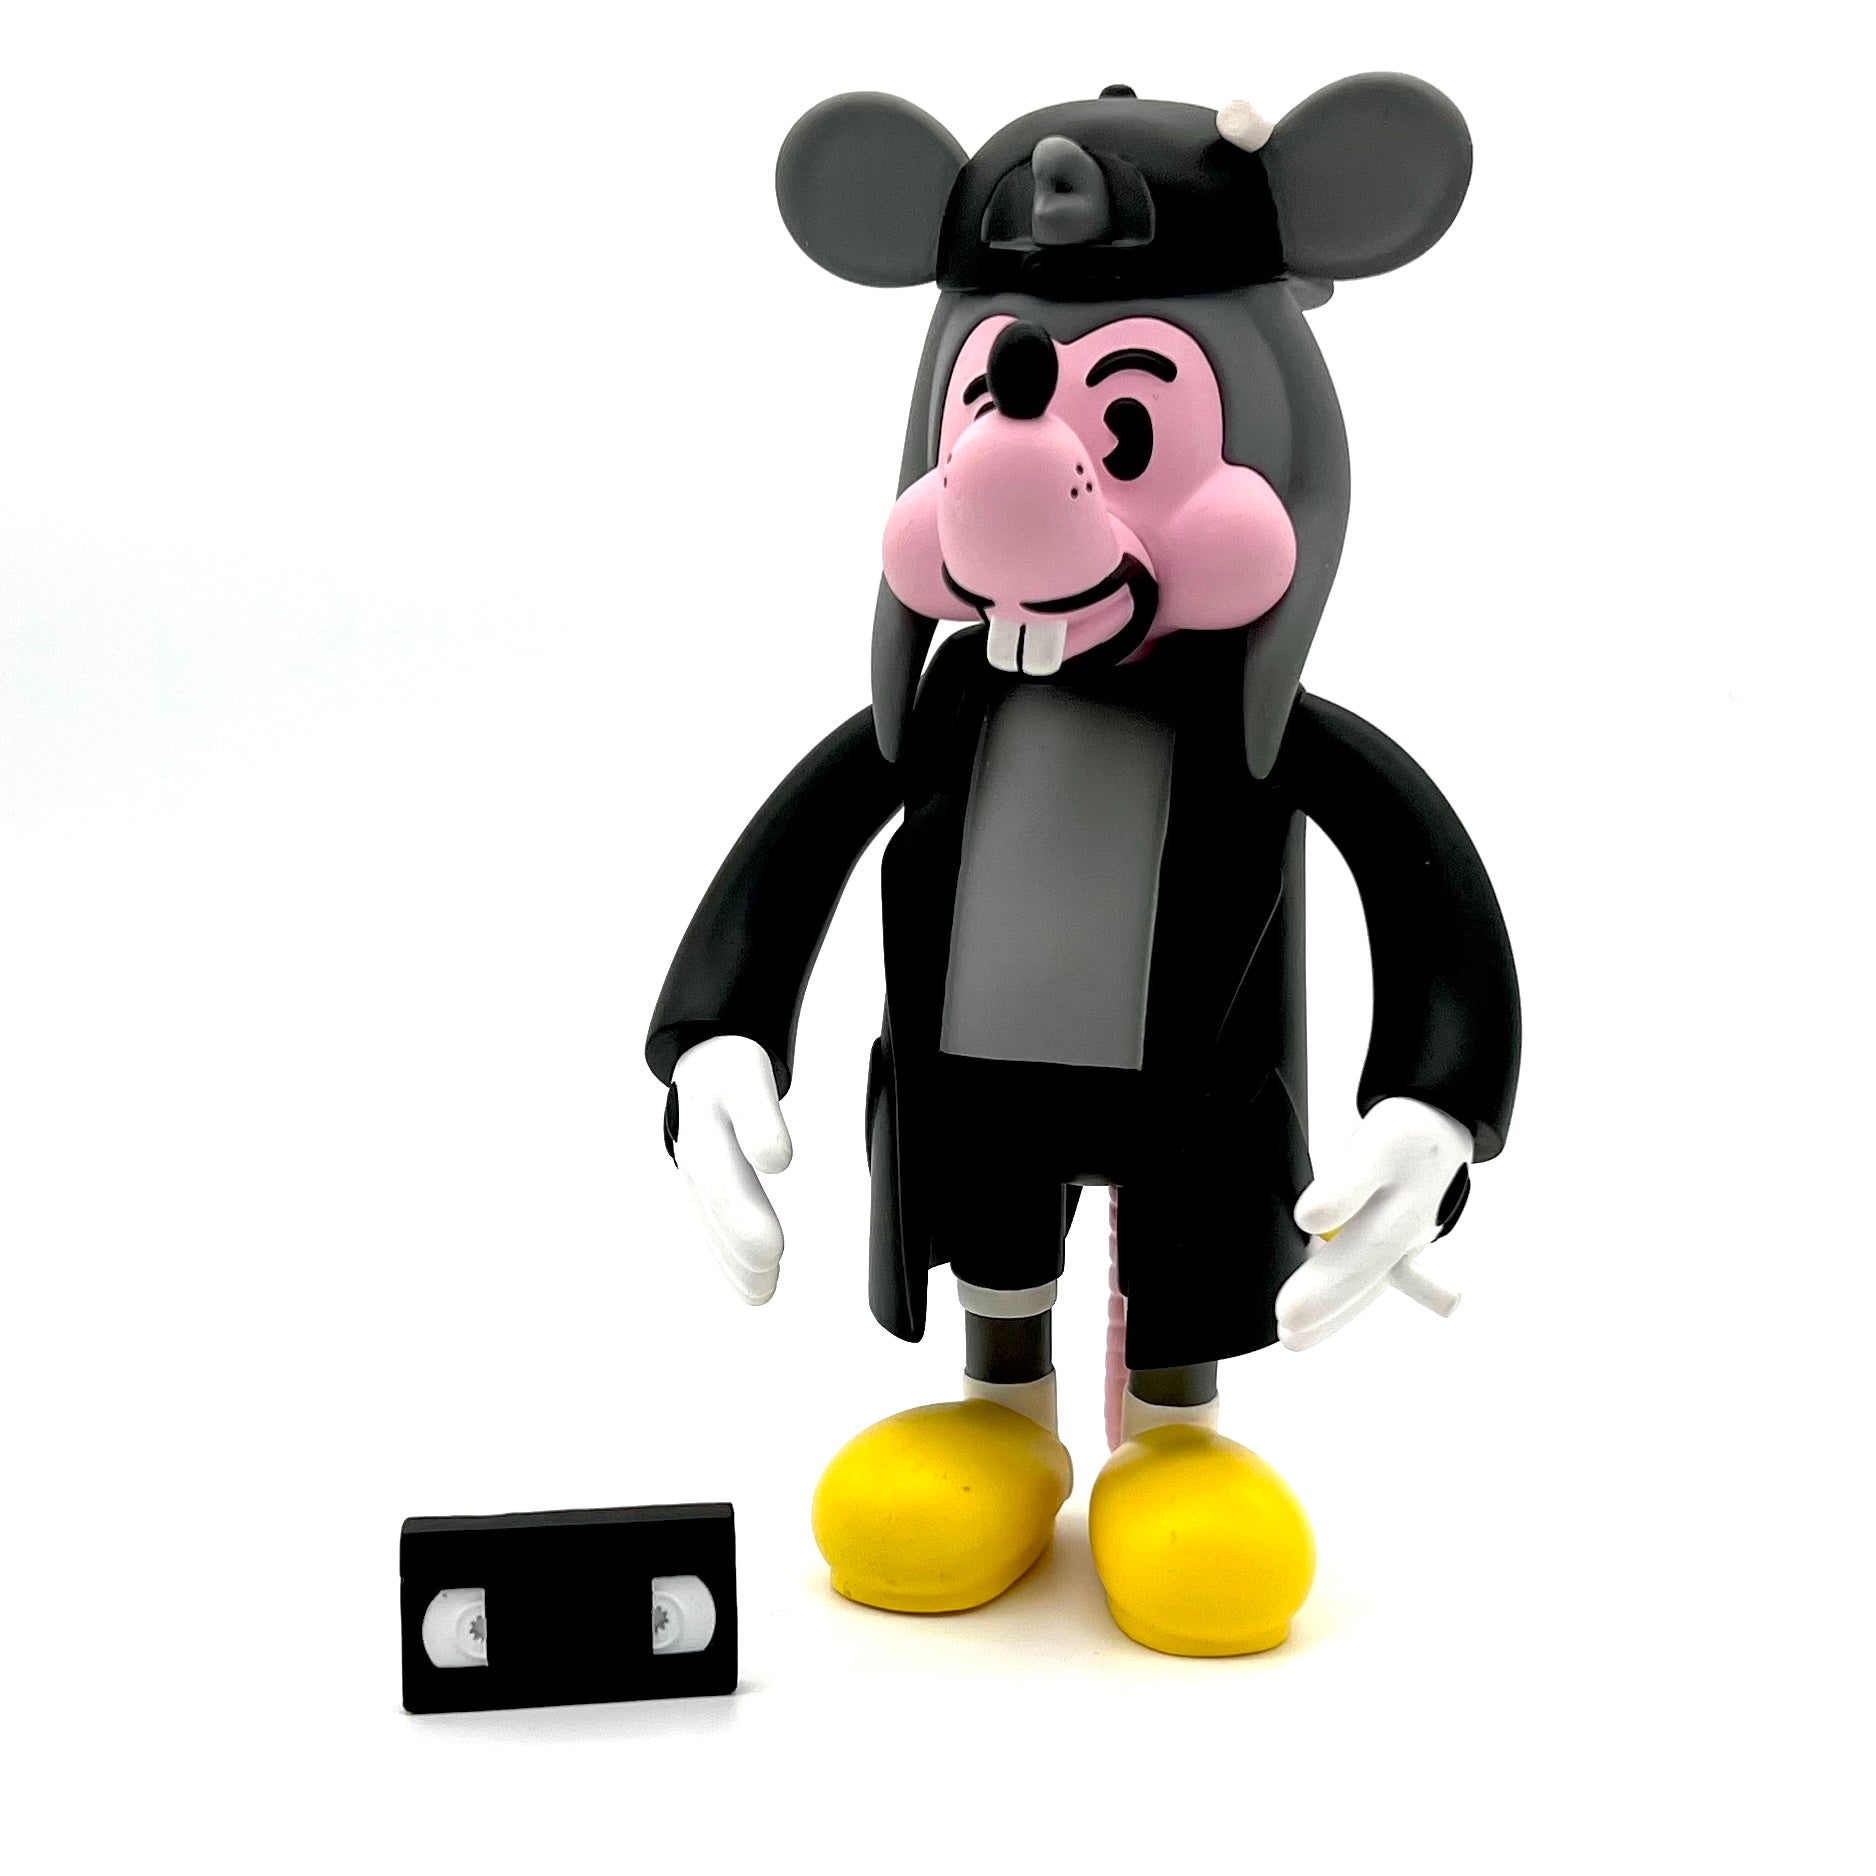 Toy mouse with hat and cassette tape, cartoon character, video tape, lemons, glove, cylinder - MallRats - OG Edition - Jay & Silent Bob x Chogrin.